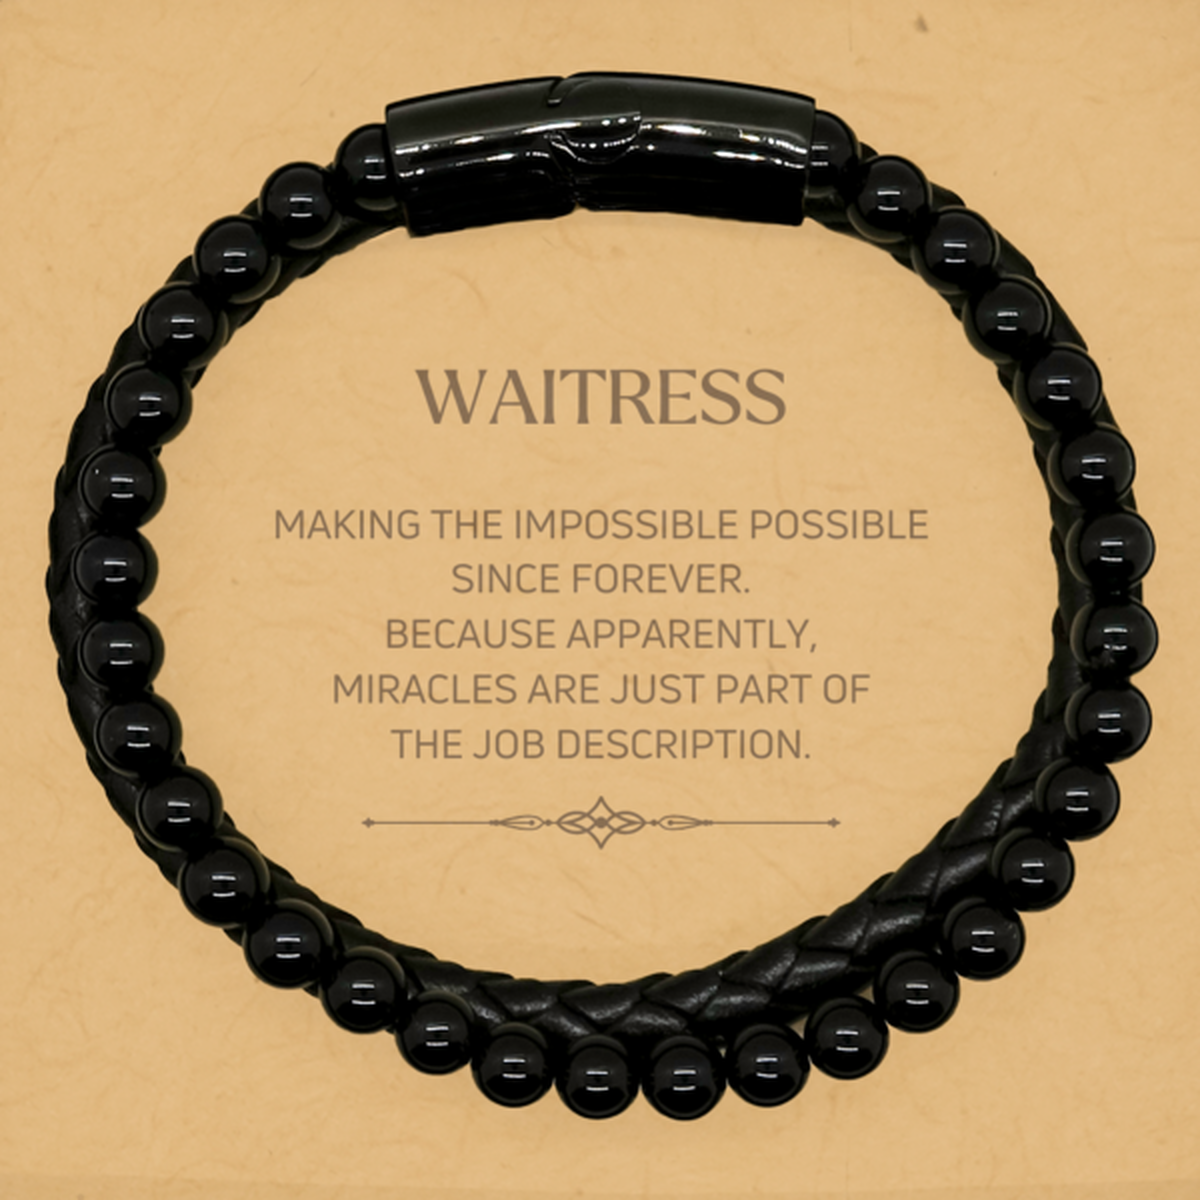 Funny Waitress Gifts, Miracles are just part of the job description, Inspirational Birthday Stone Leather Bracelets For Waitress, Men, Women, Coworkers, Friends, Boss